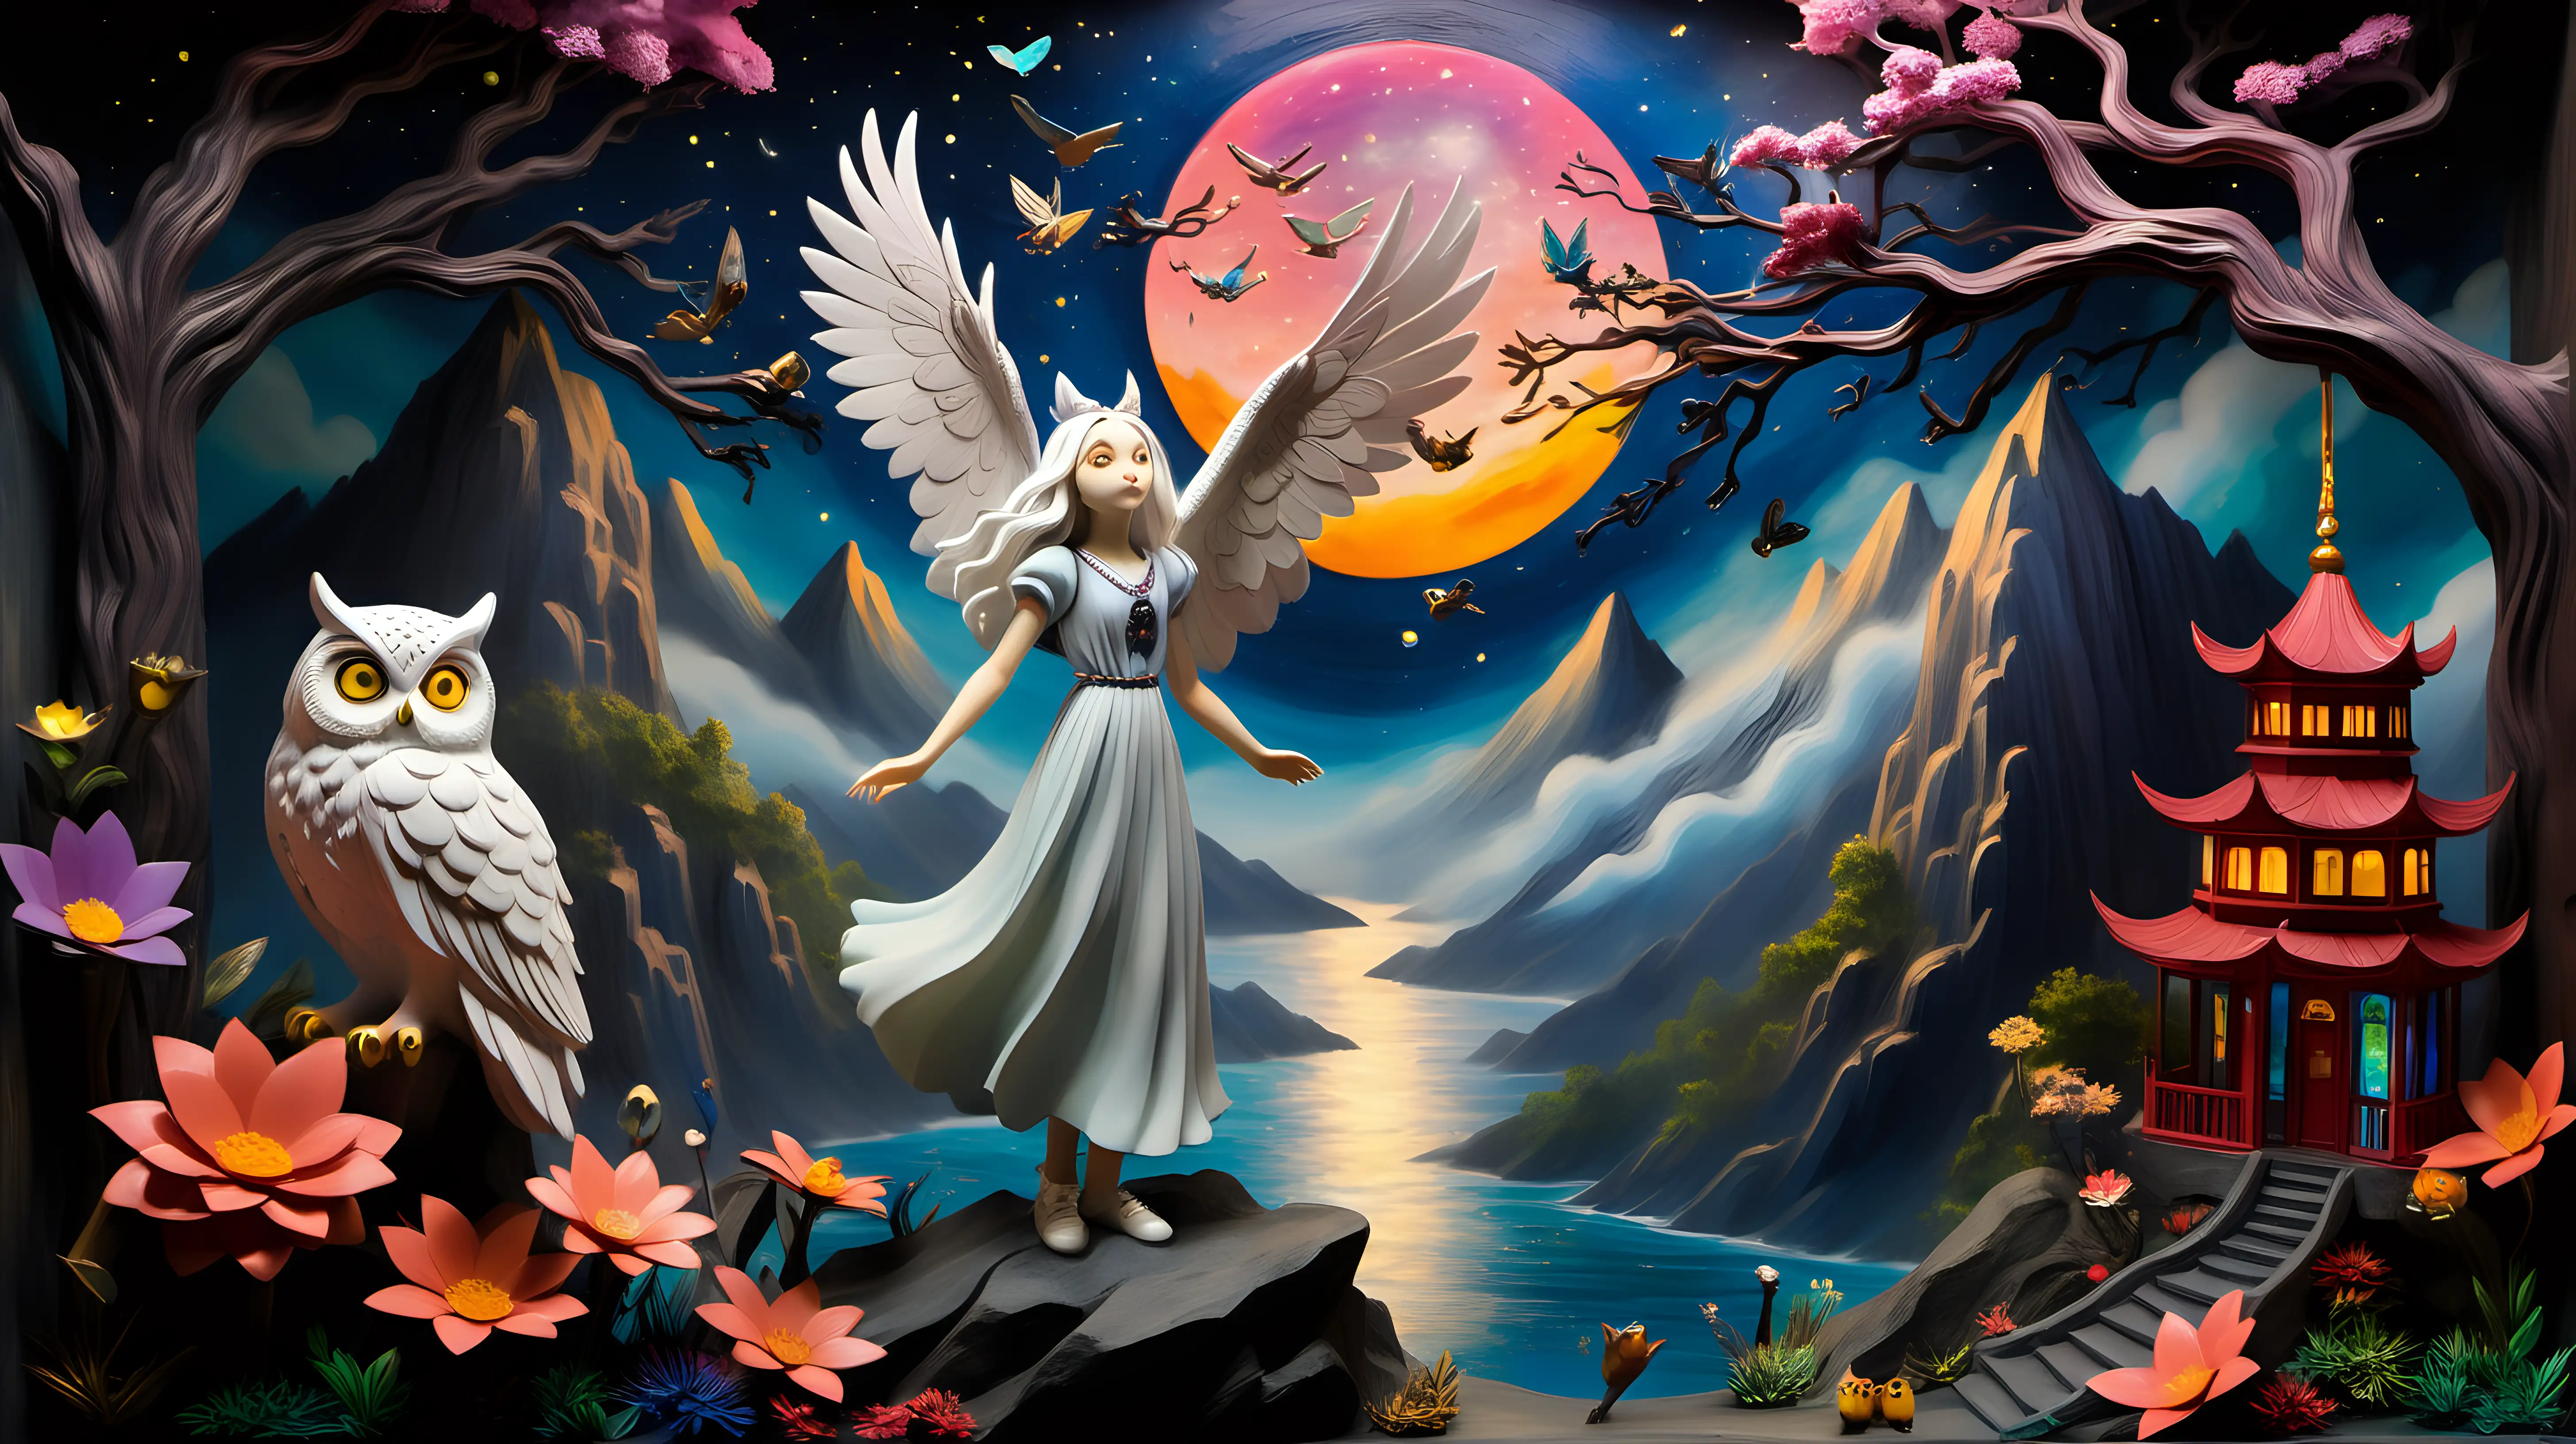 Enchanting GhibliInspired Owl Princess in Colorful Forest